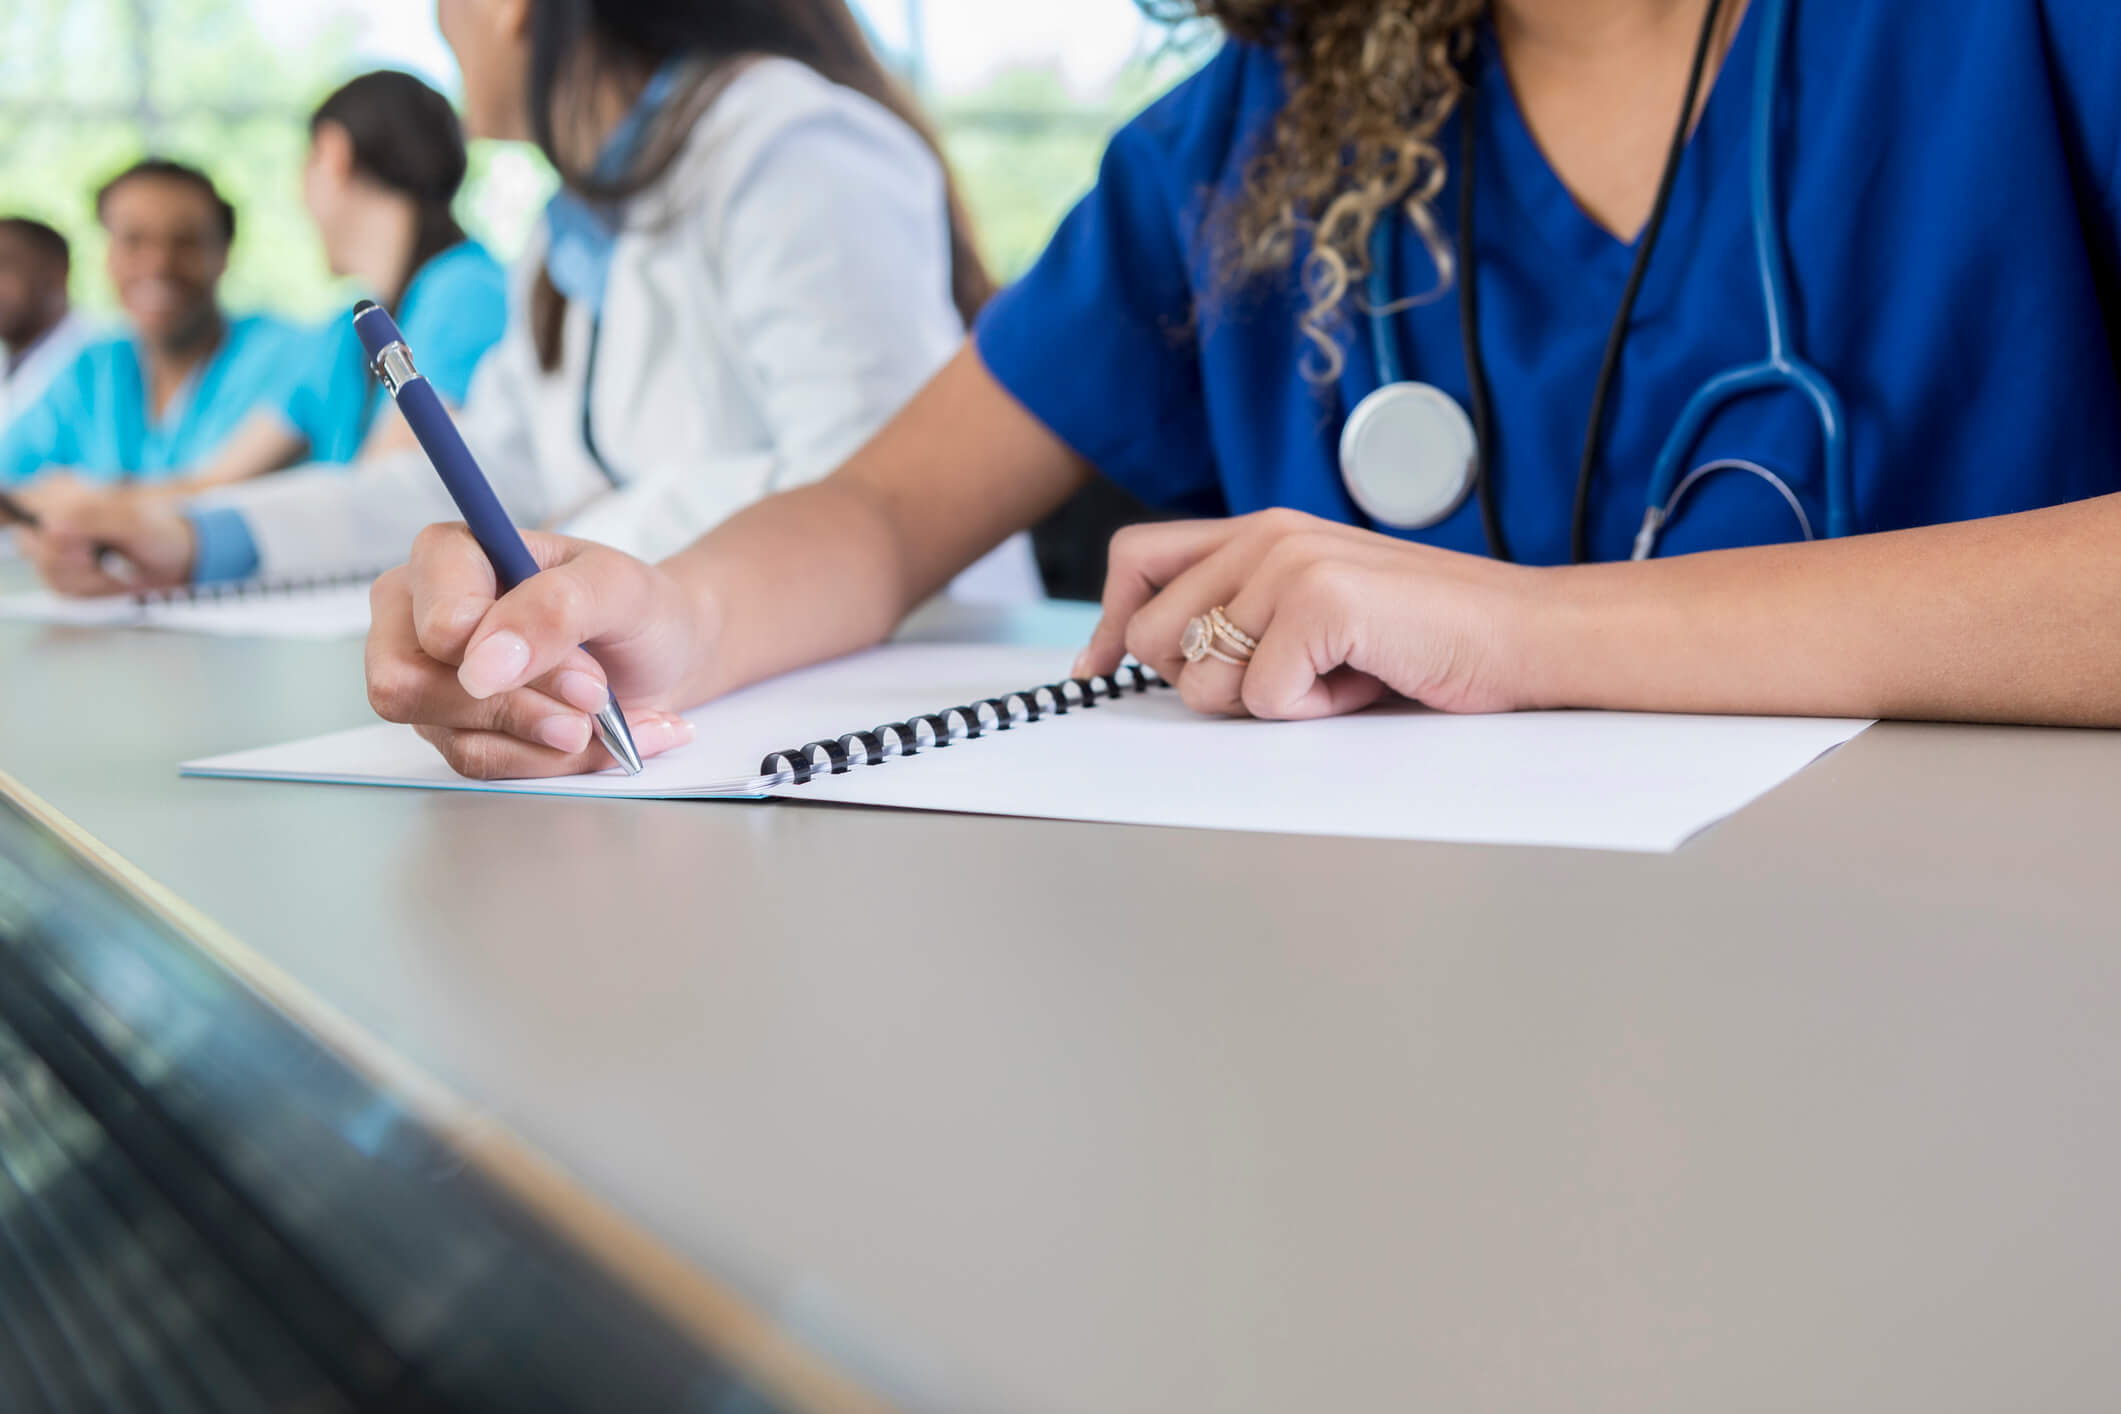 Roeschke Law, LLC discusses why medical schools should mandate training in caring for disabled patients.